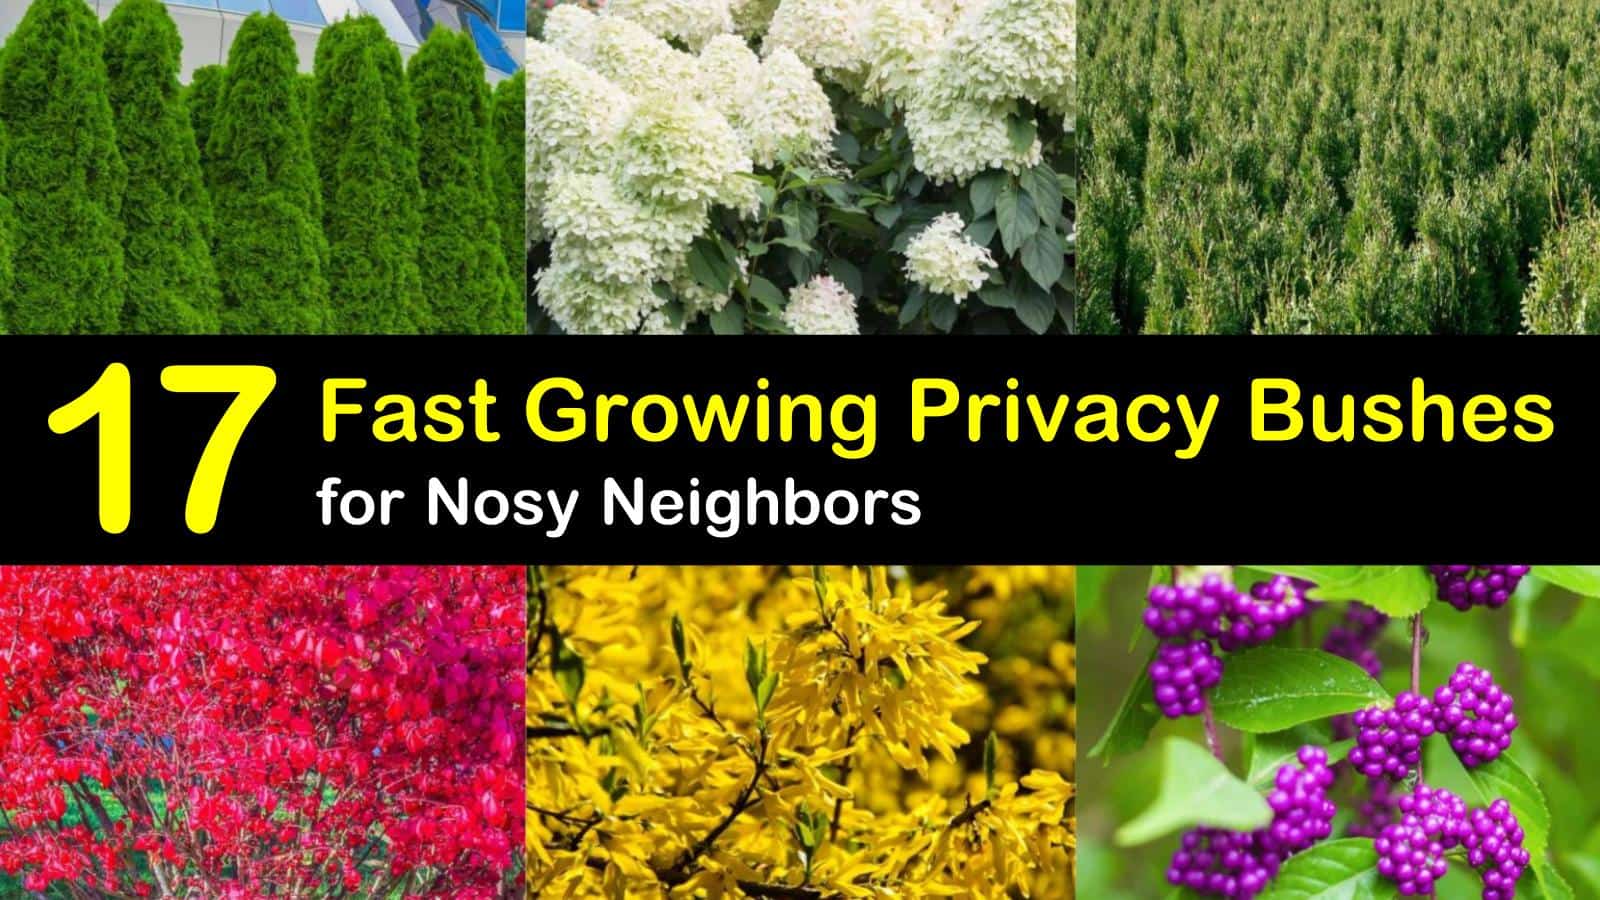 20 Fast Growing Privacy Bushes to Deal with Nosy Neighbors